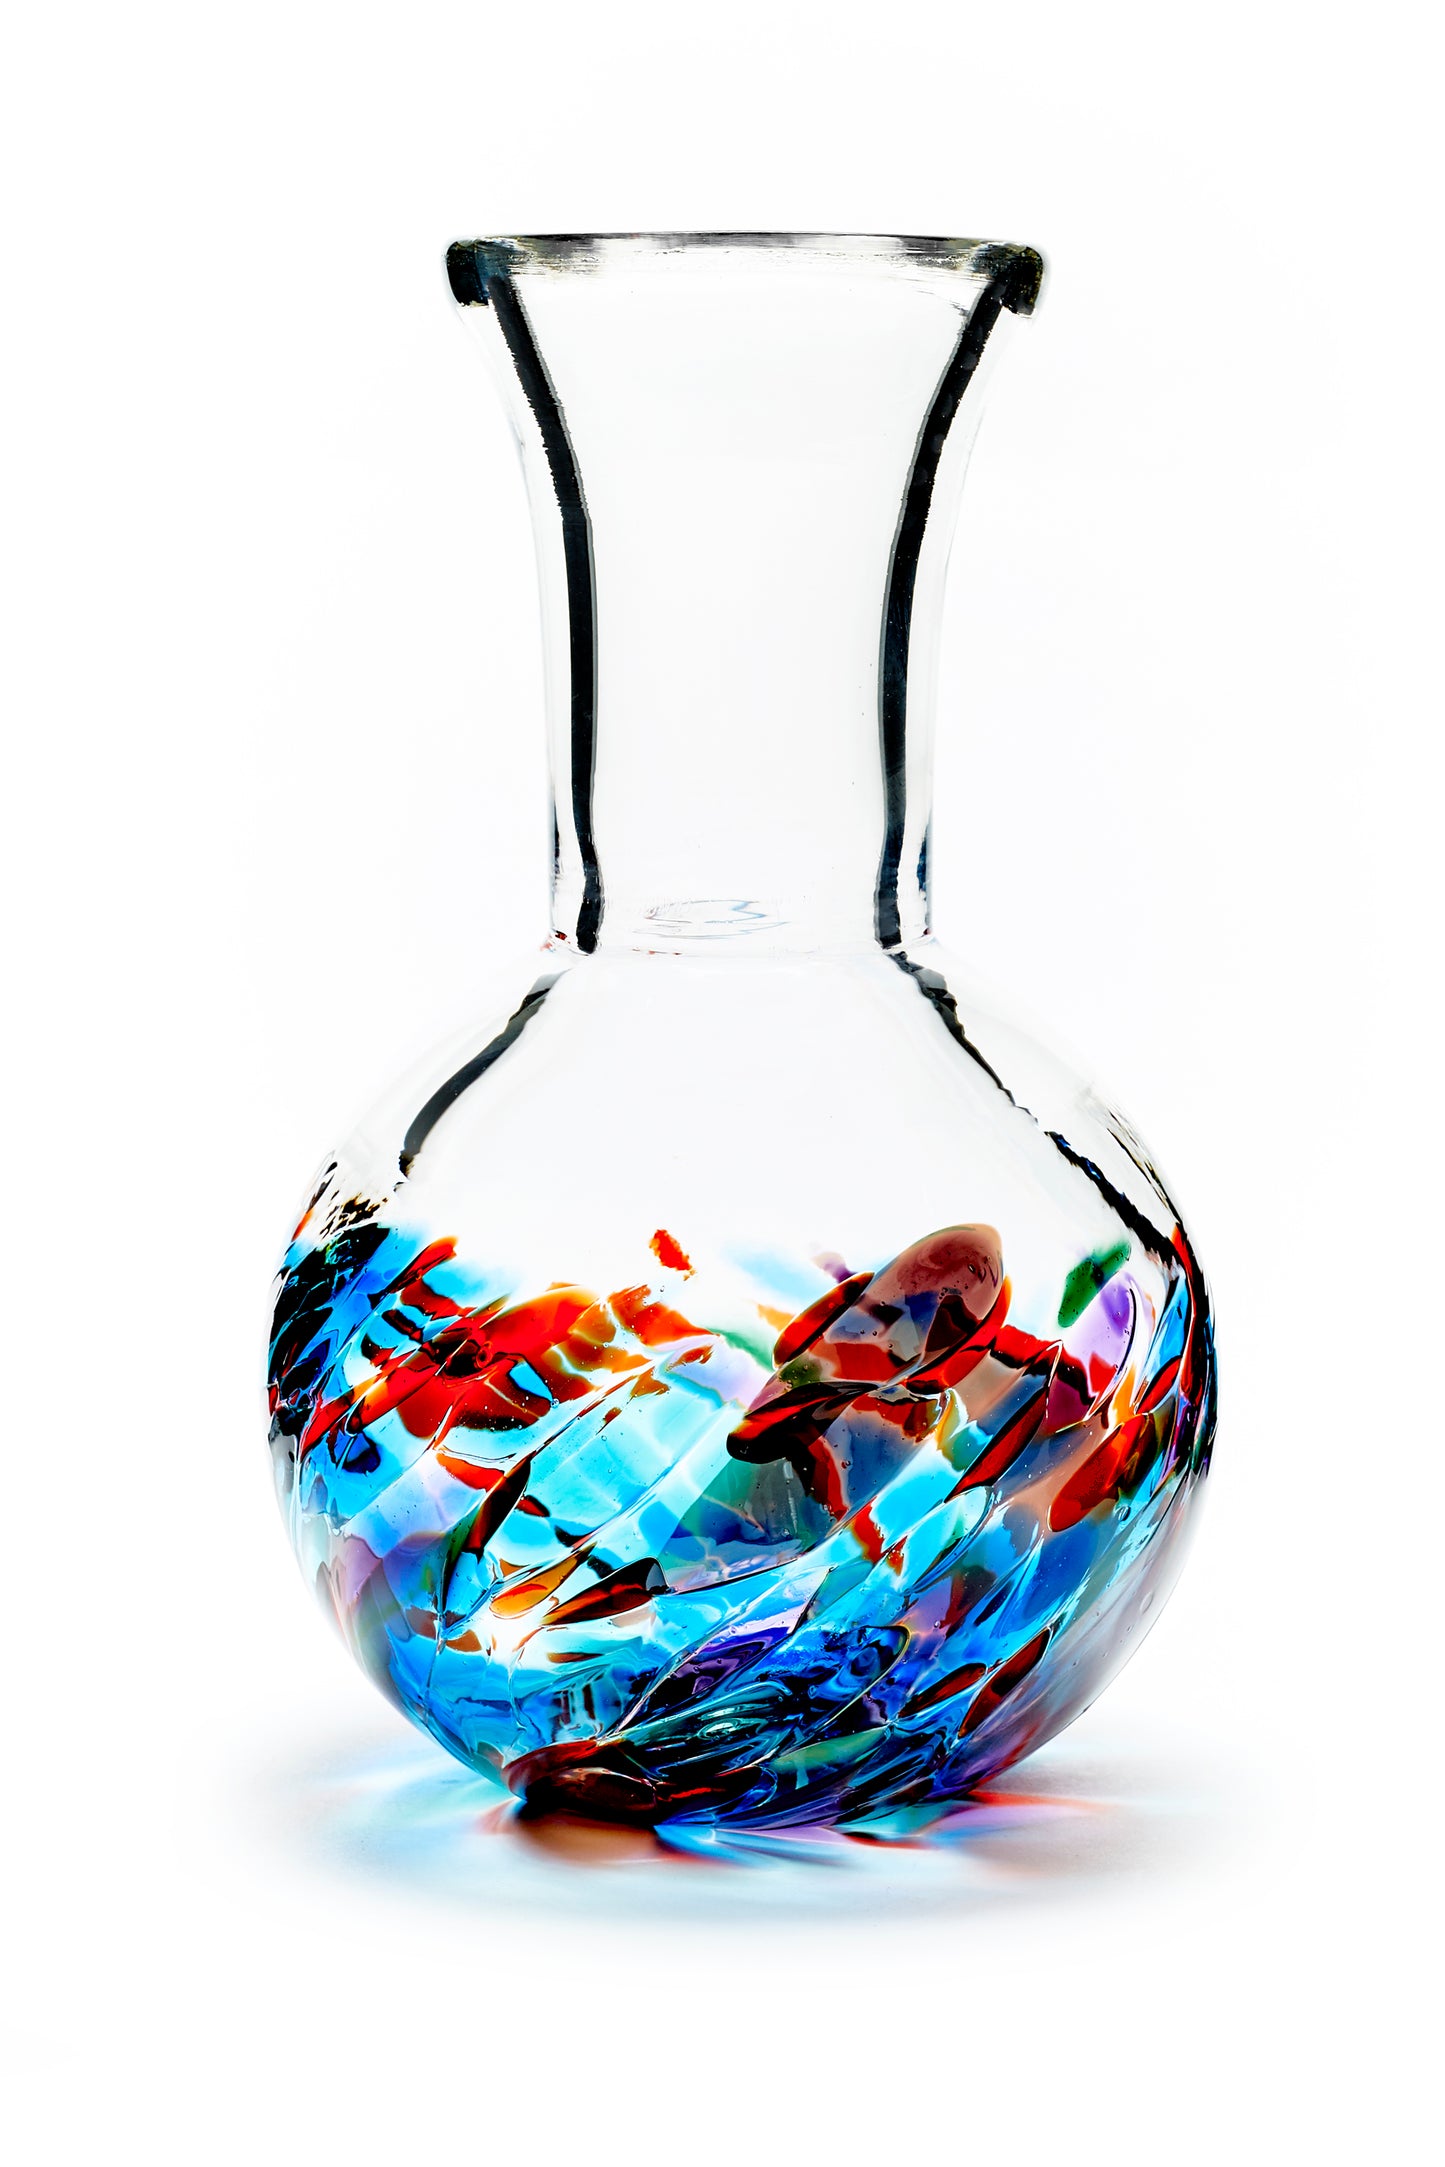 Hand blown glass vase. Red, blue, and purple glass on the bottom. Colour combination is called "Rainbow."